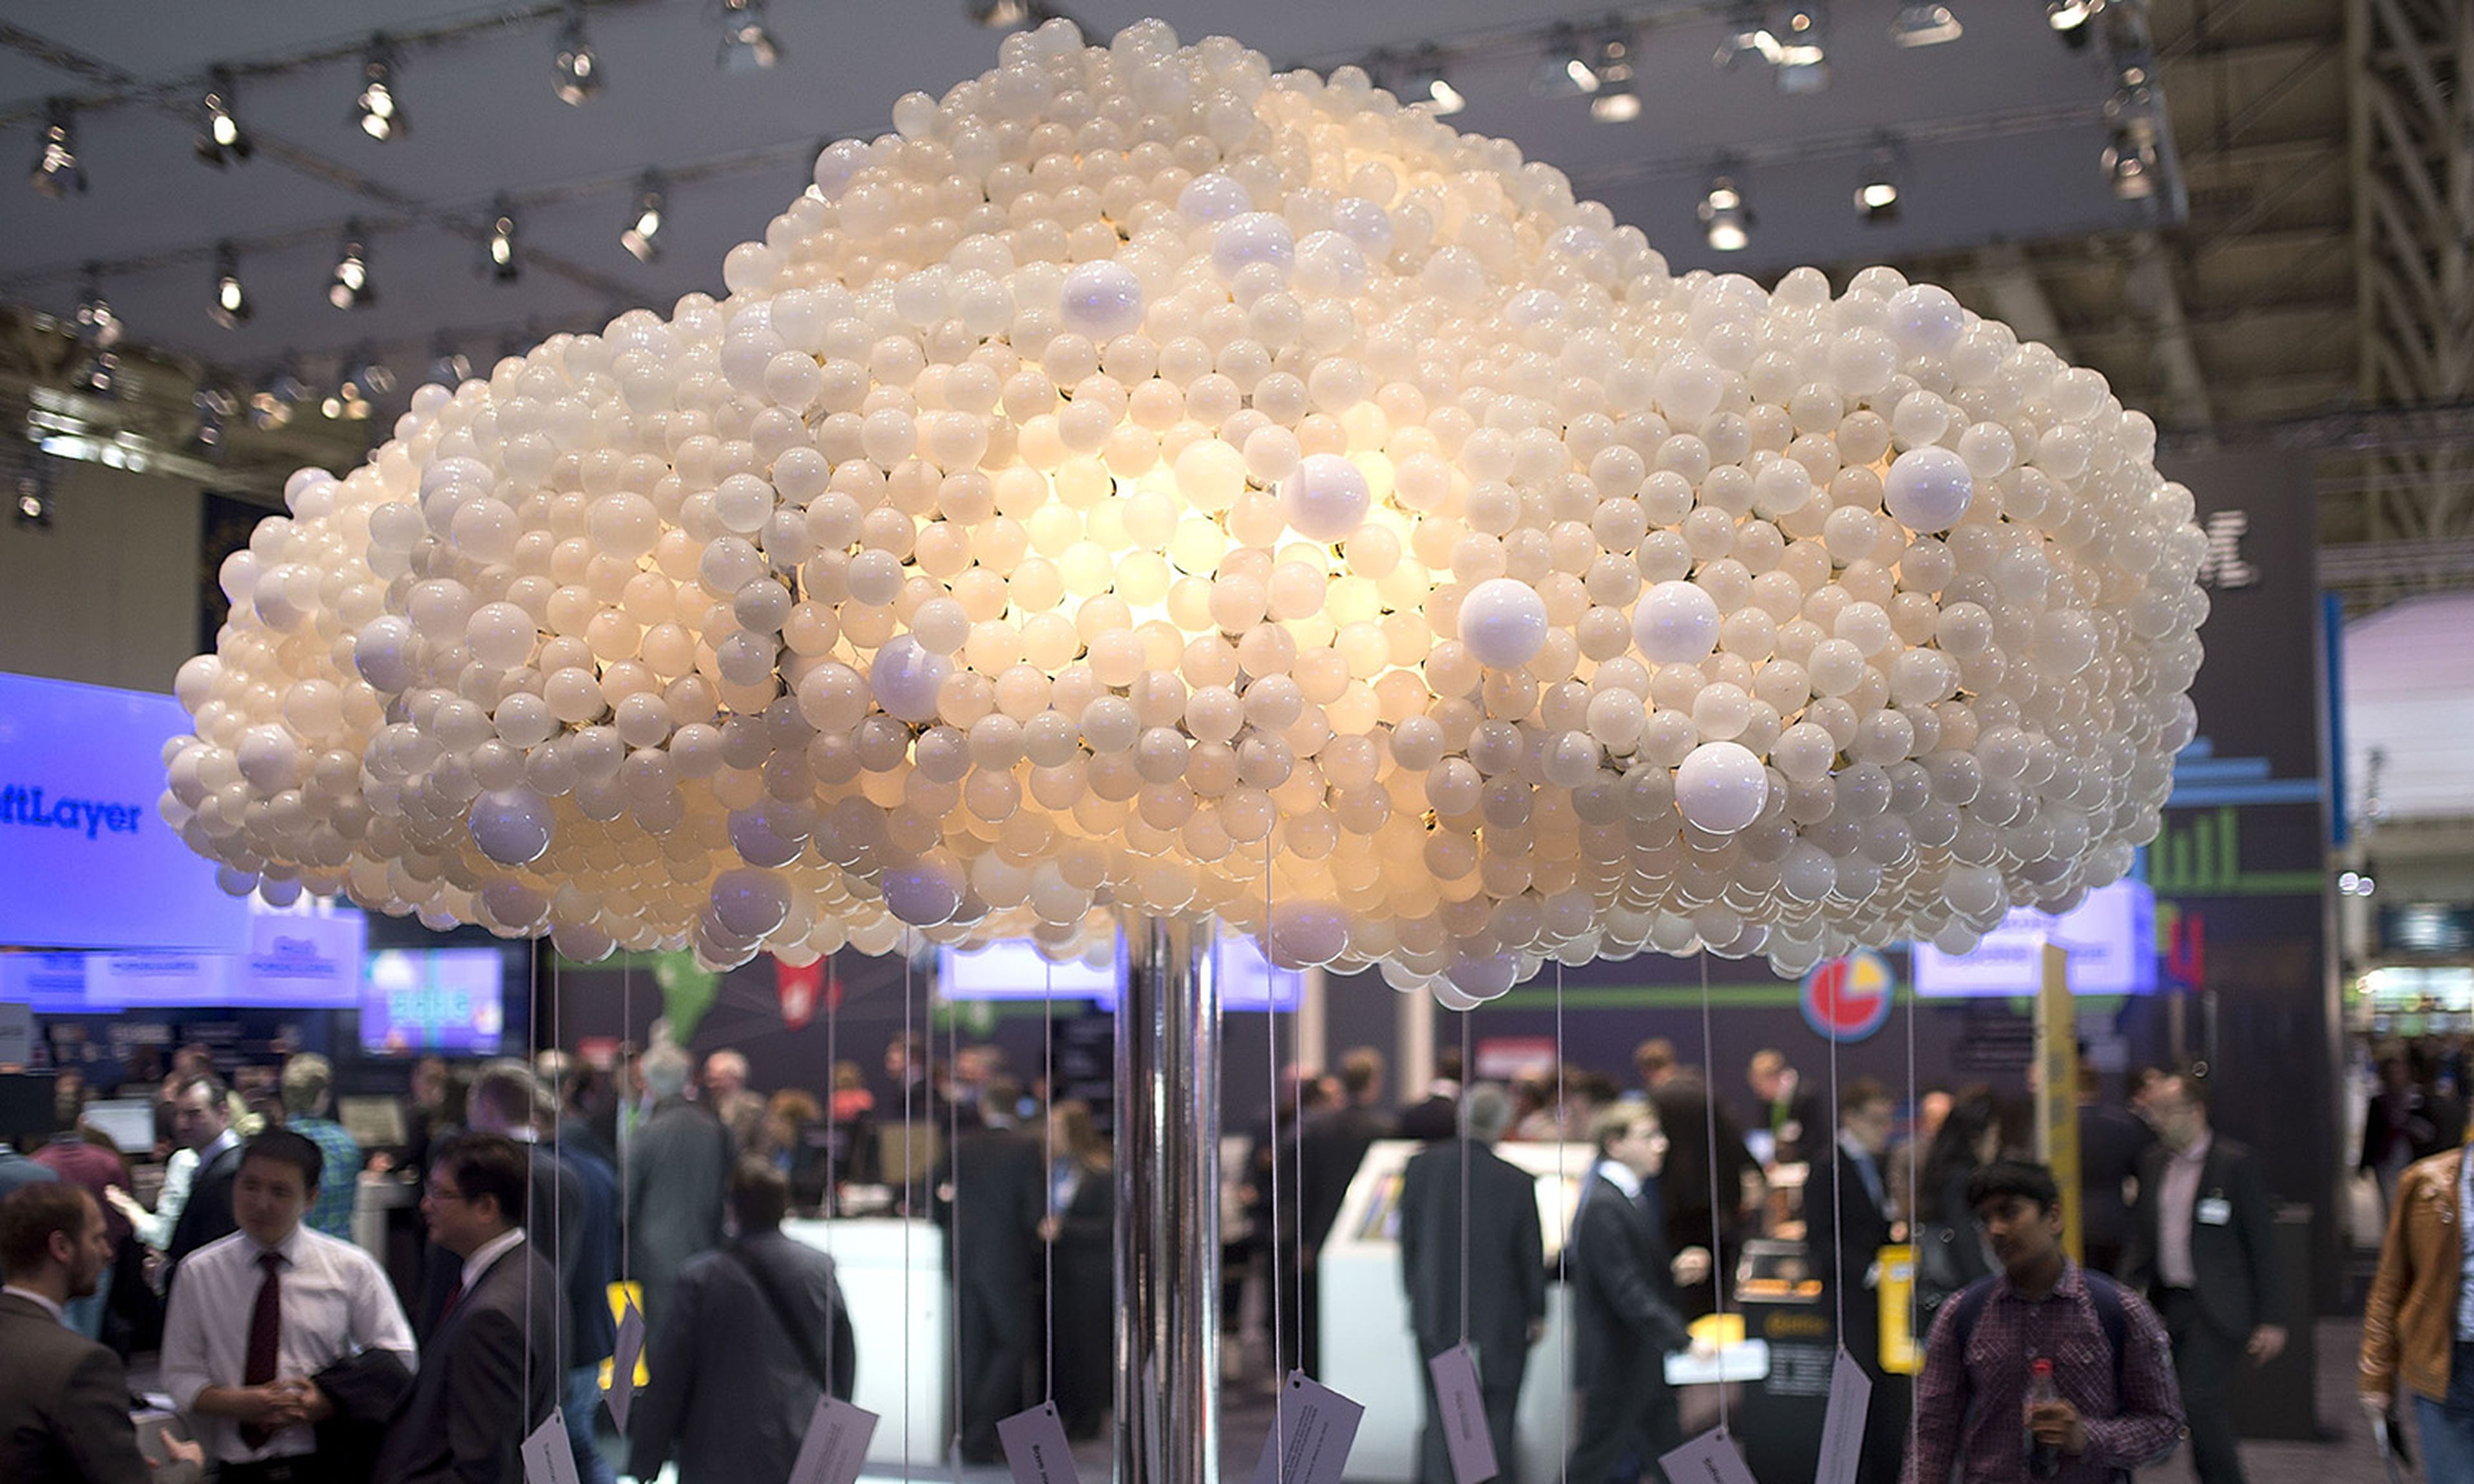 A symbolic data cloud is seen at the 2014 CeBIT technology trade fair on March 10, 2014, in Hanover, Germany. (Photo by Nigel Treblin/Getty Images)